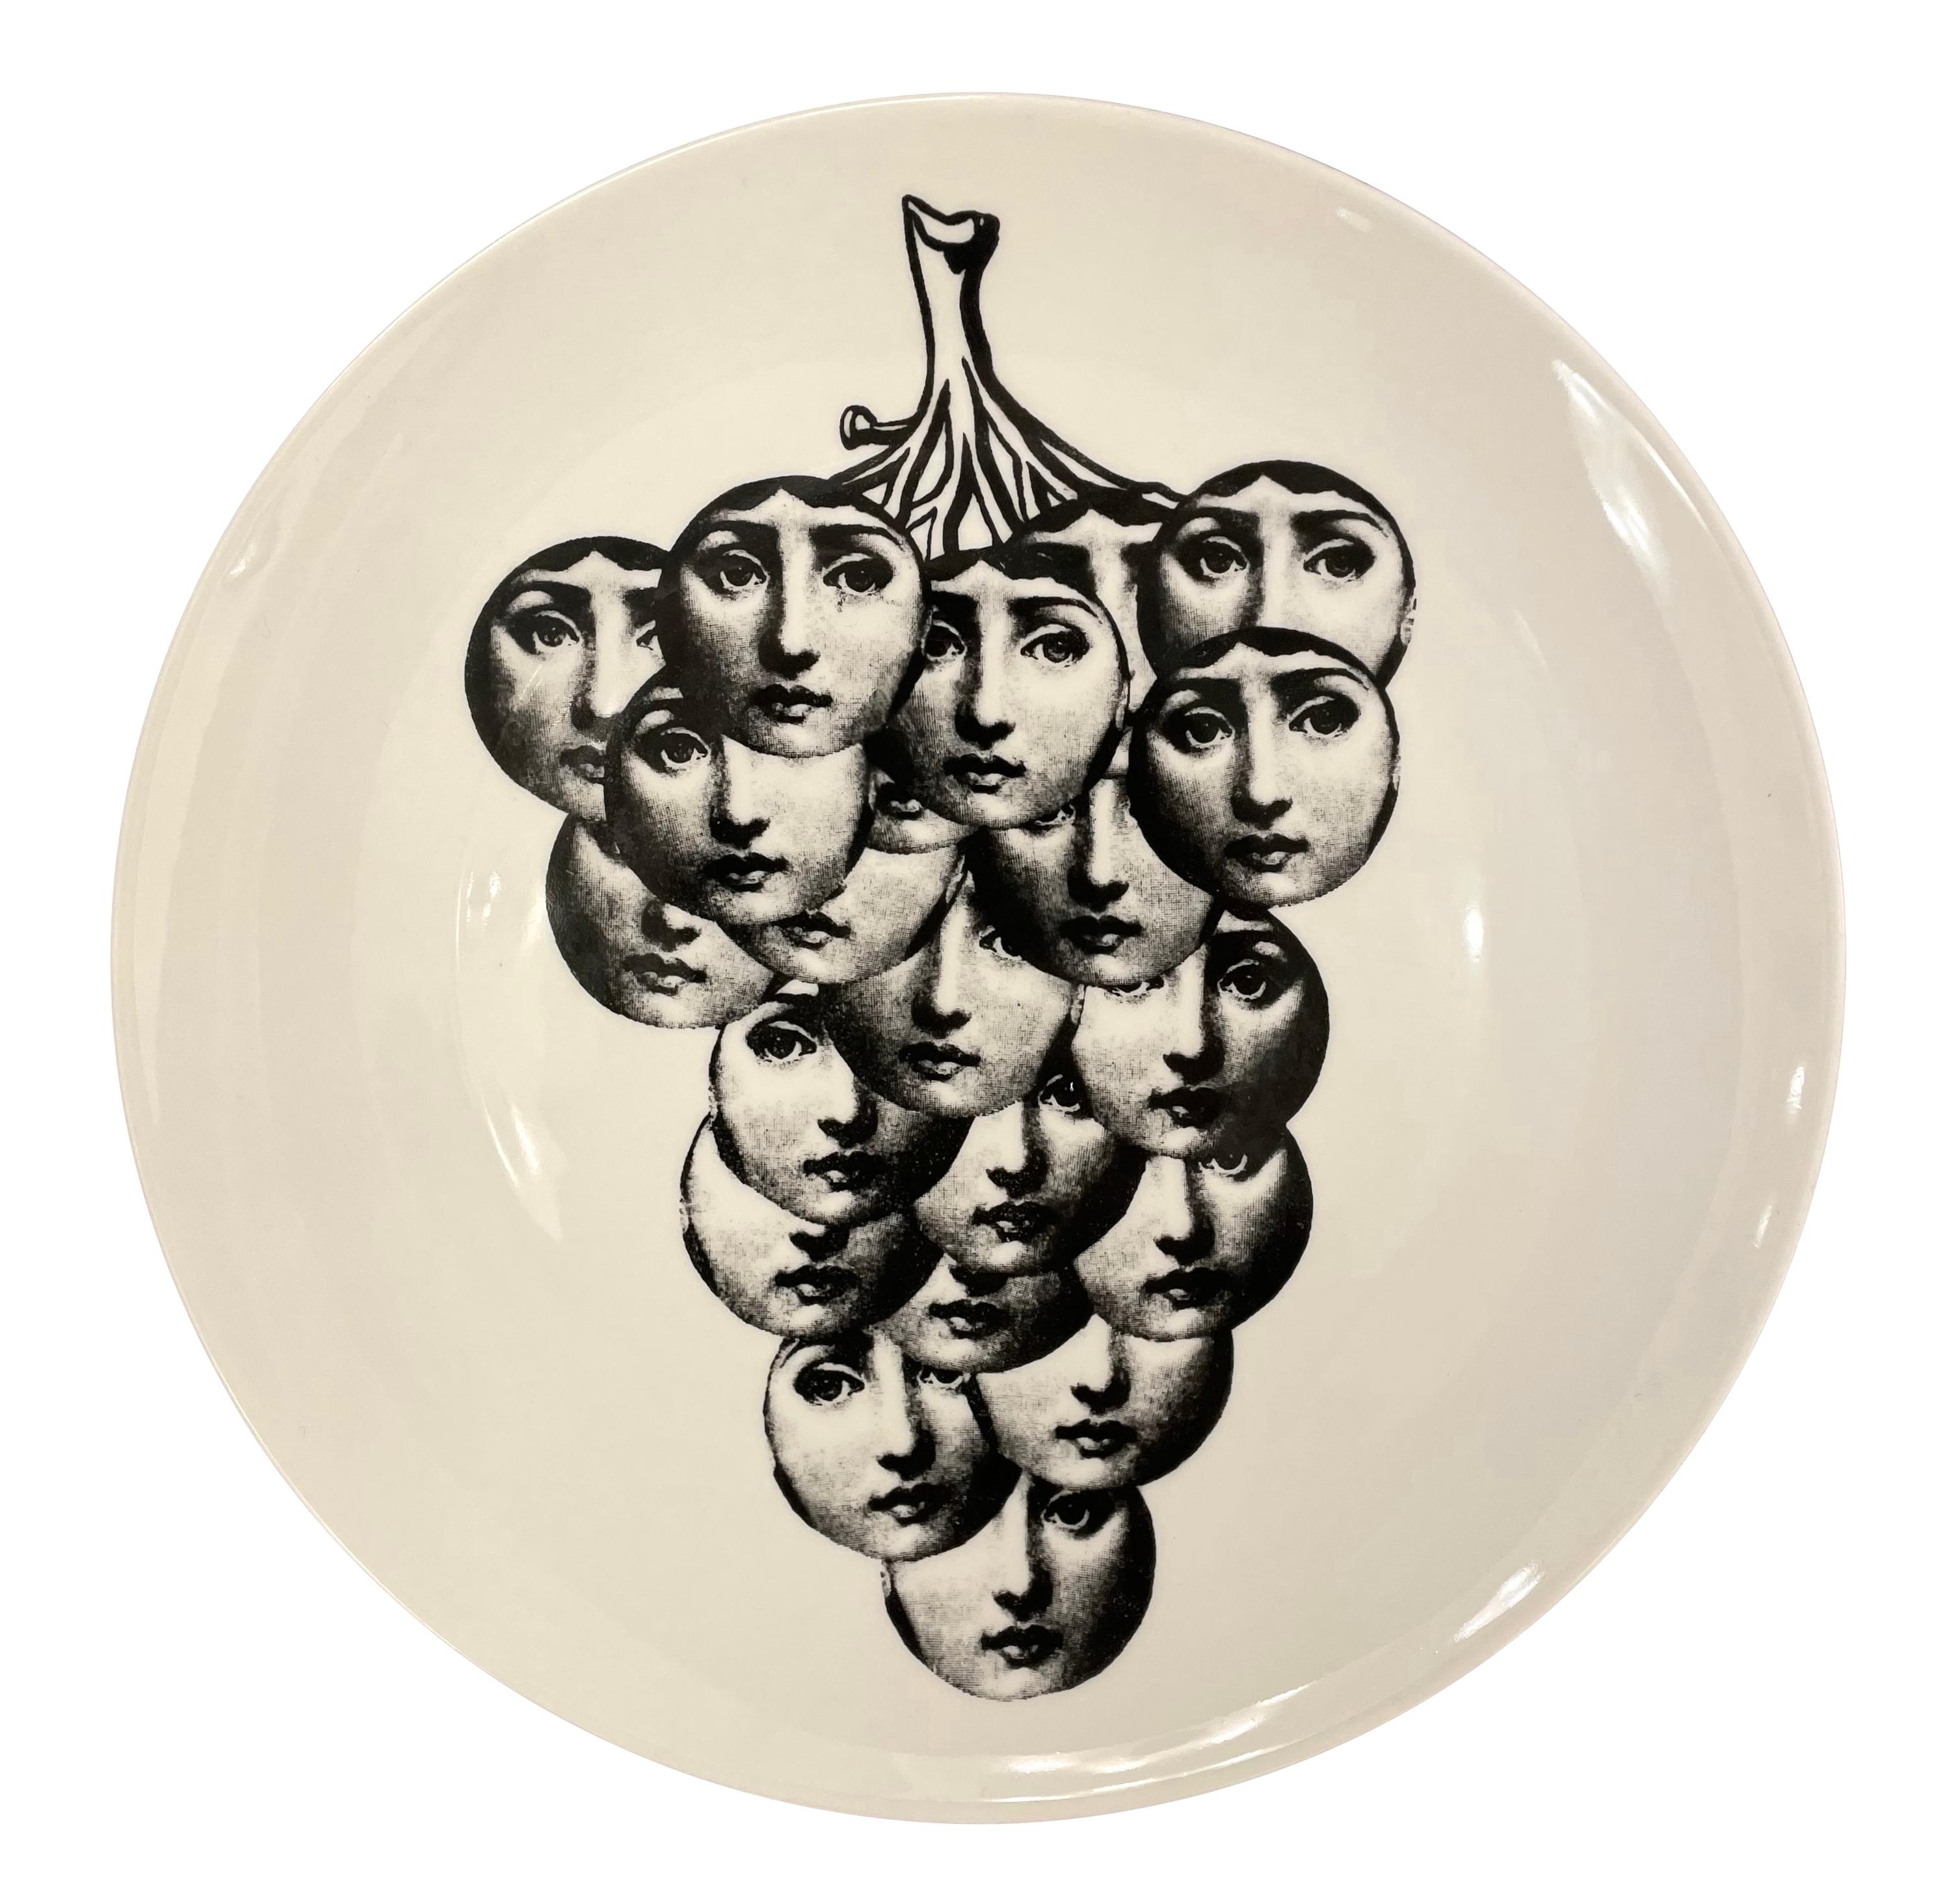 Vintage Piero Fornasetti Plates from the 